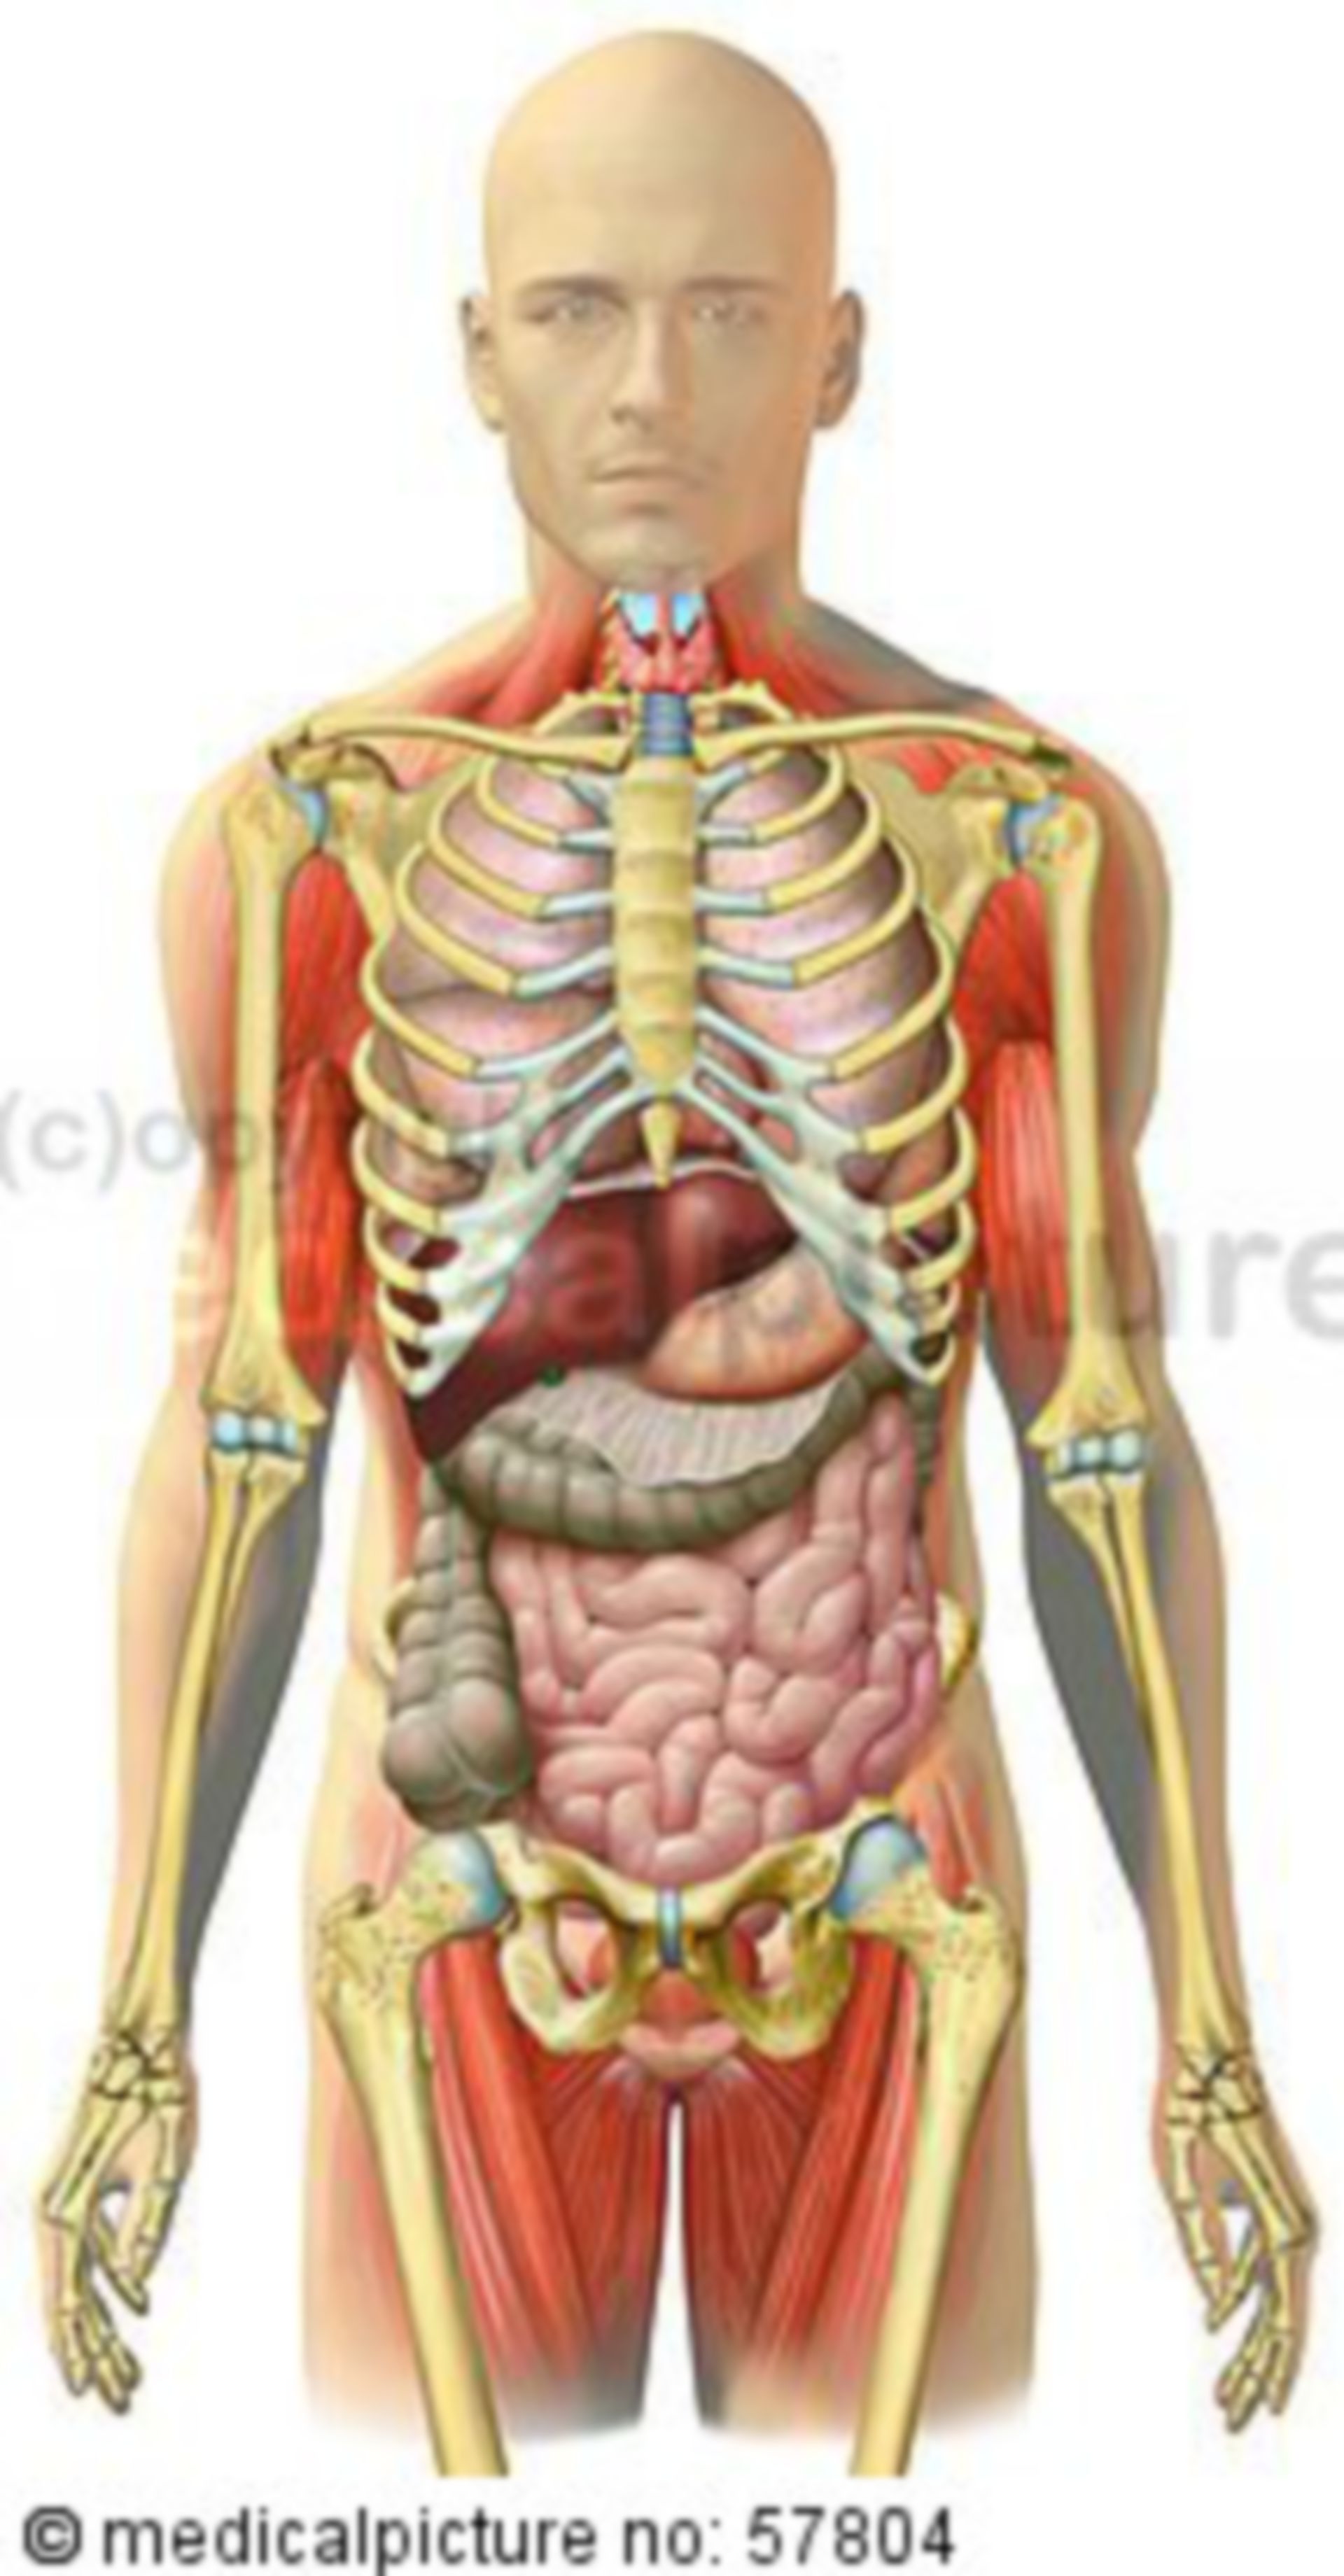 Anatomical illustrations - skeleton with pectoral, abdominal, pelvic intestines, and skeletal muscles